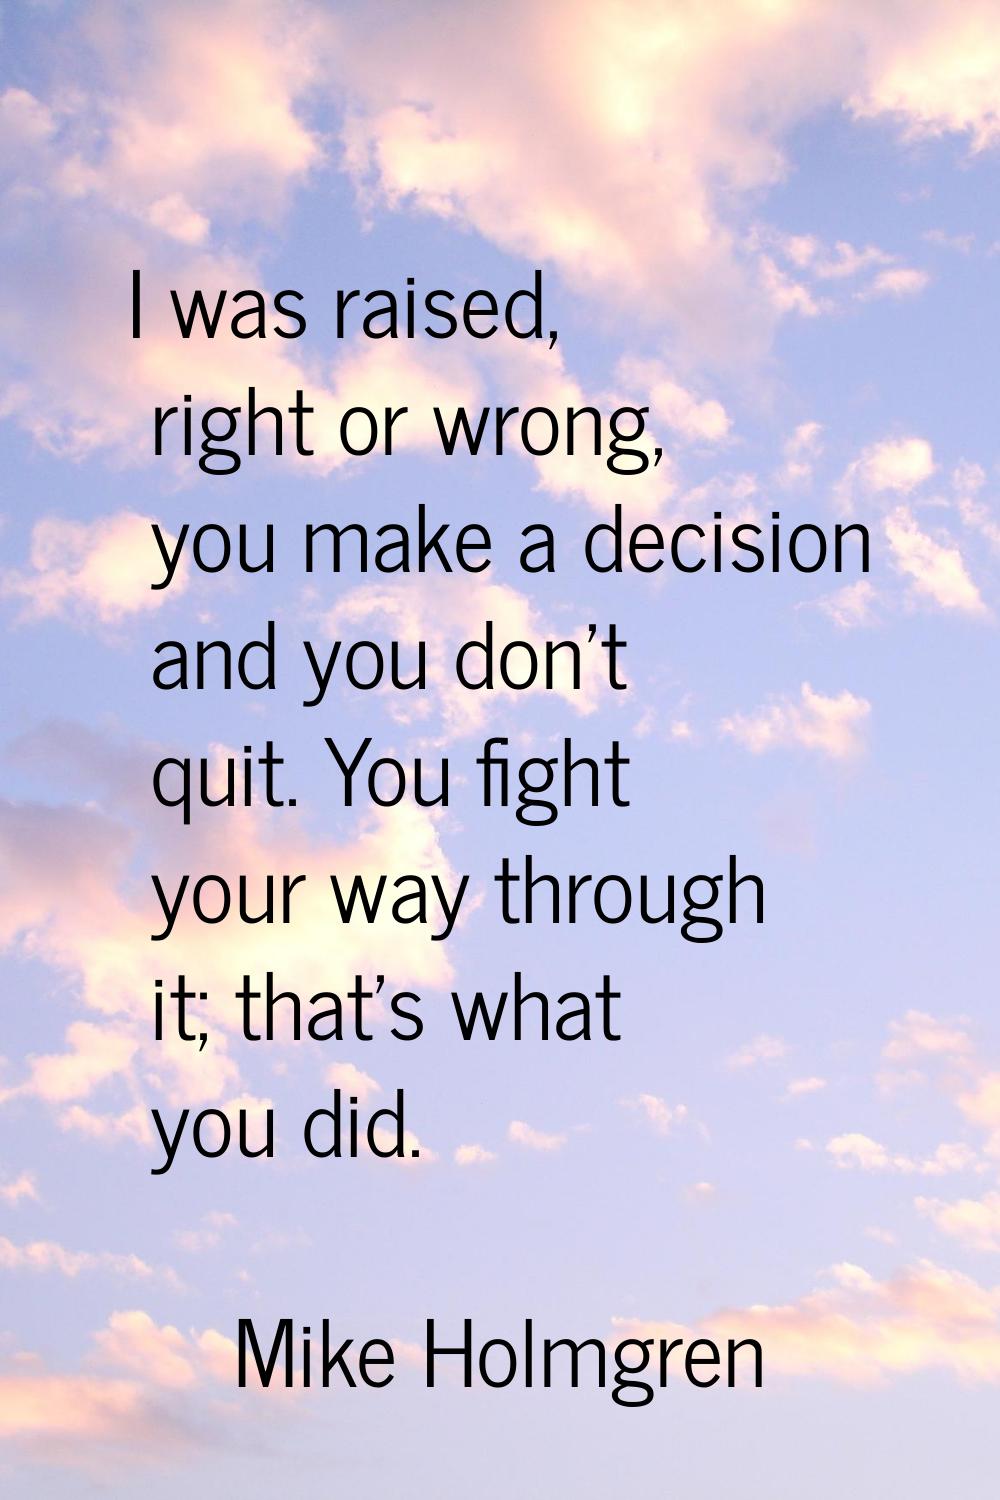 I was raised, right or wrong, you make a decision and you don't quit. You fight your way through it